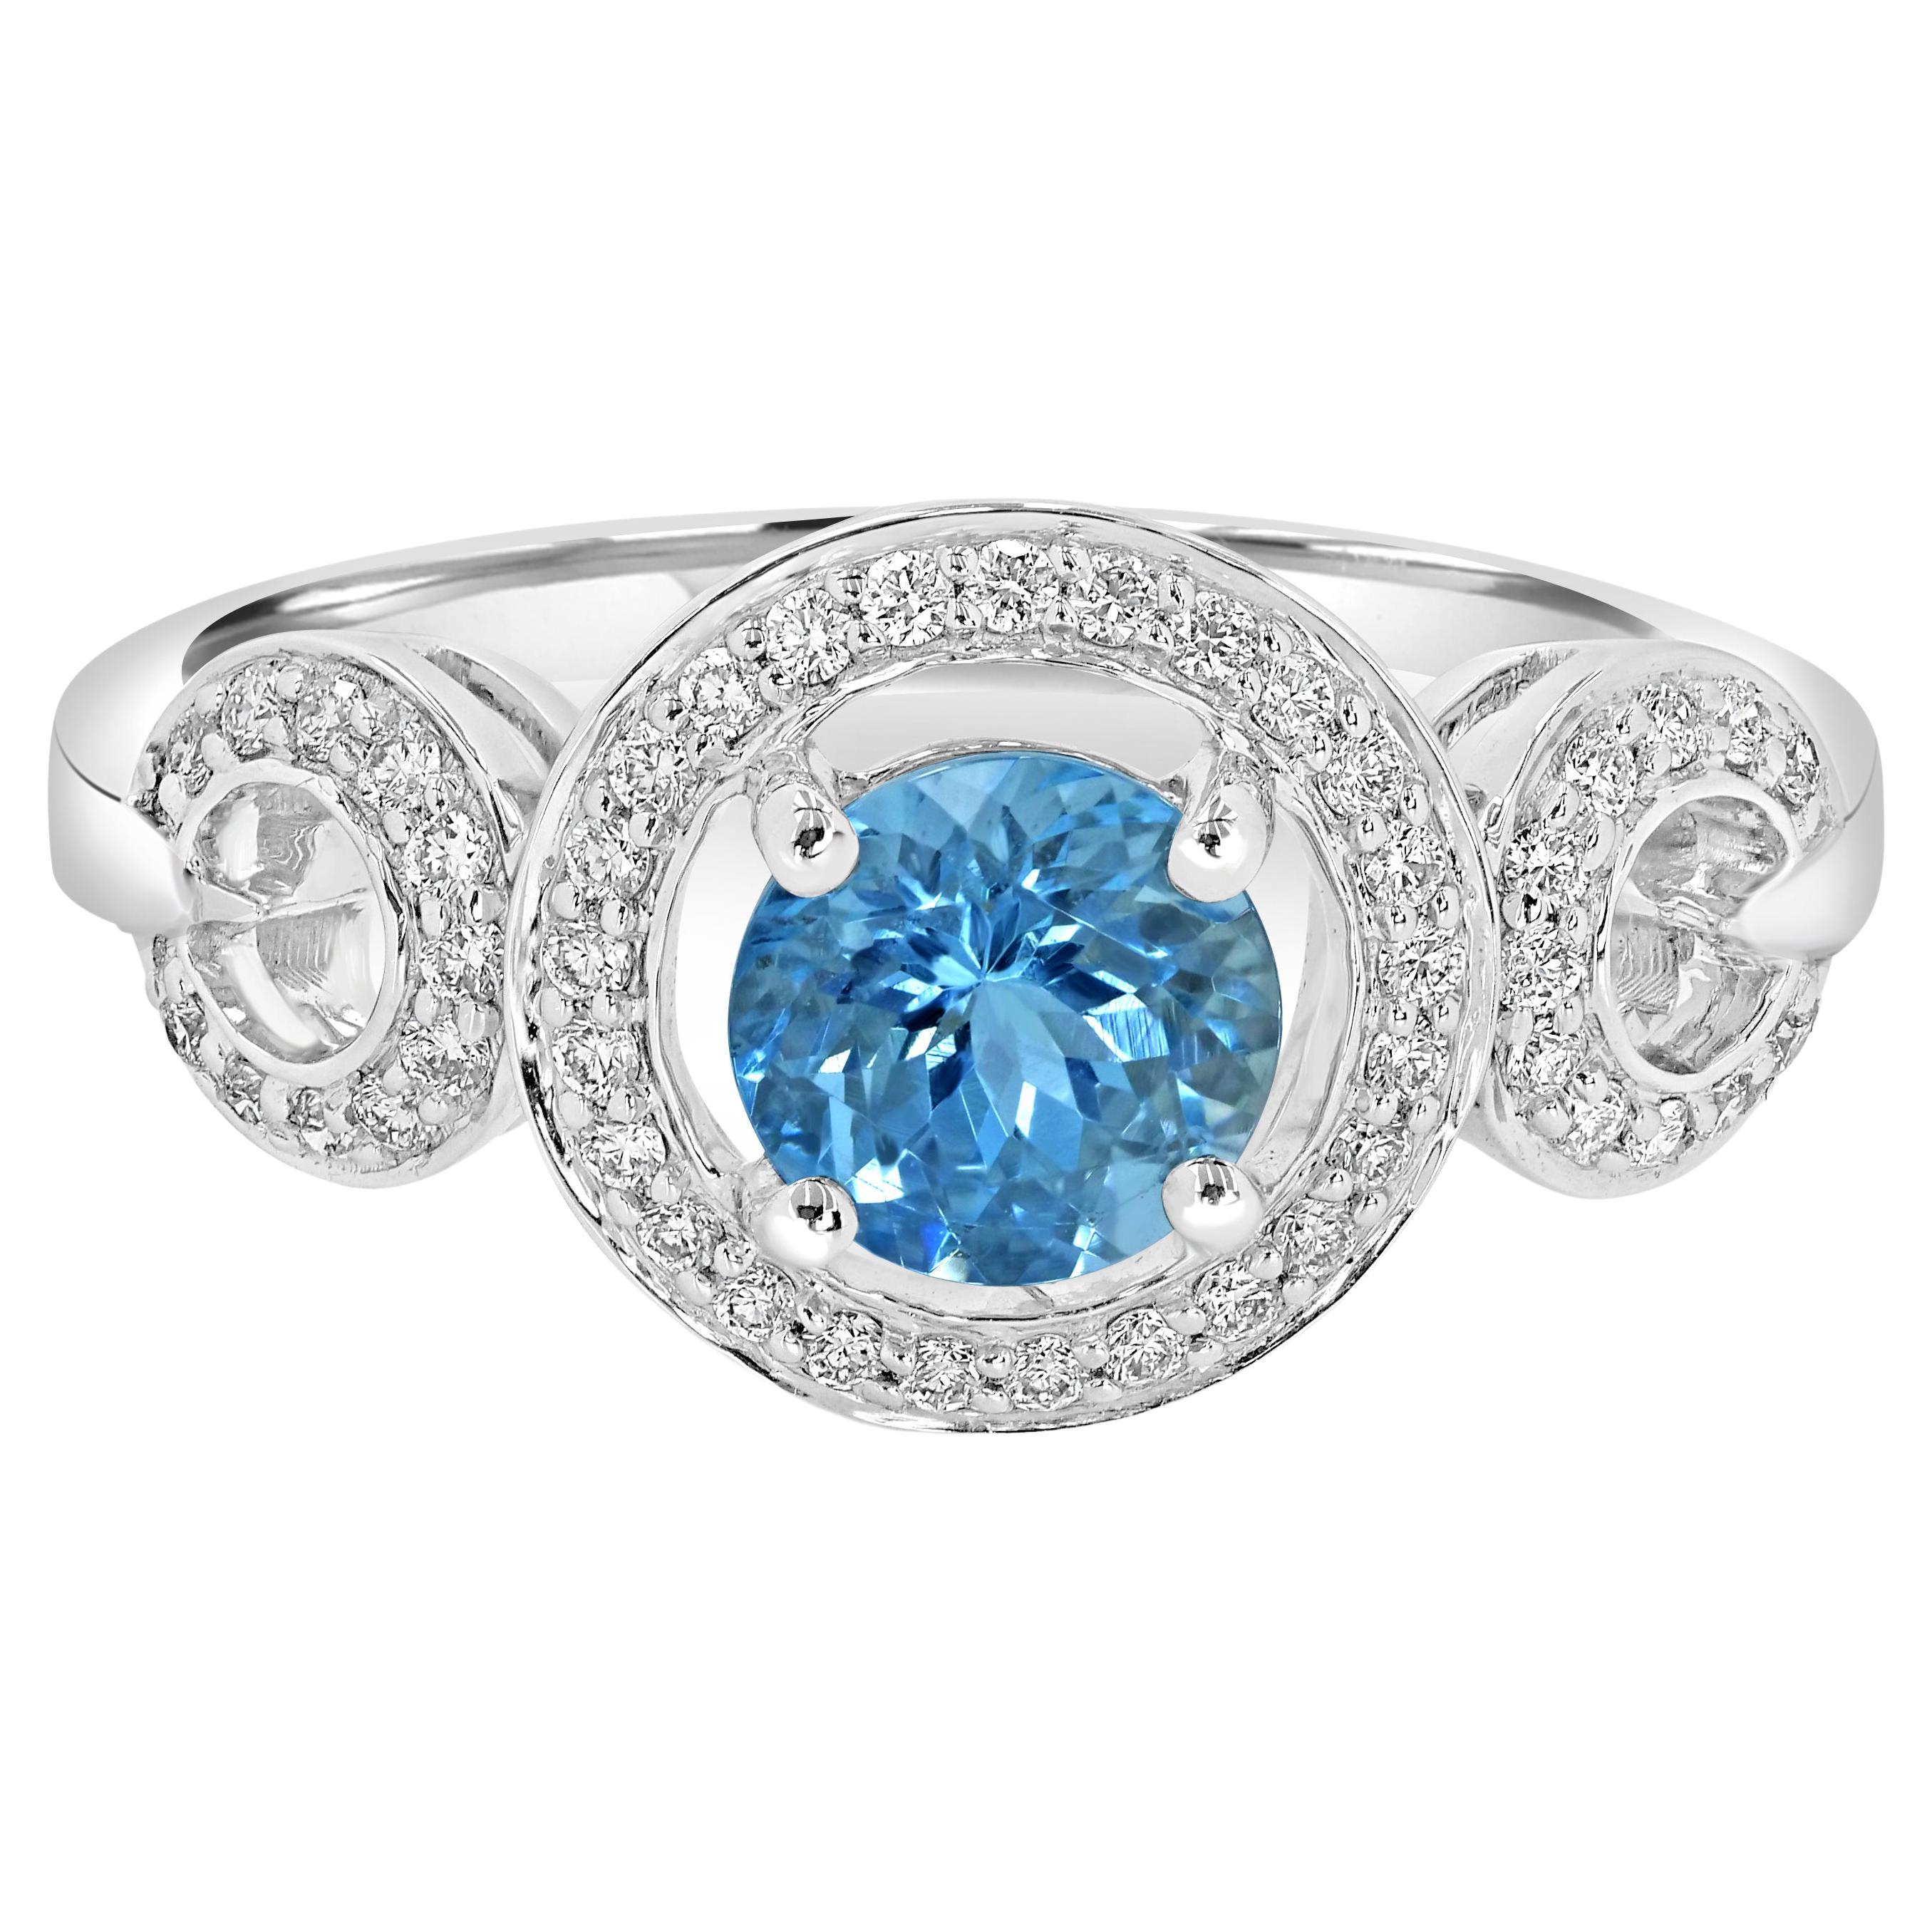 14K White Gold 0.72cts Aquamarine and Diamond Ring, Style# TS1192AQR For Sale